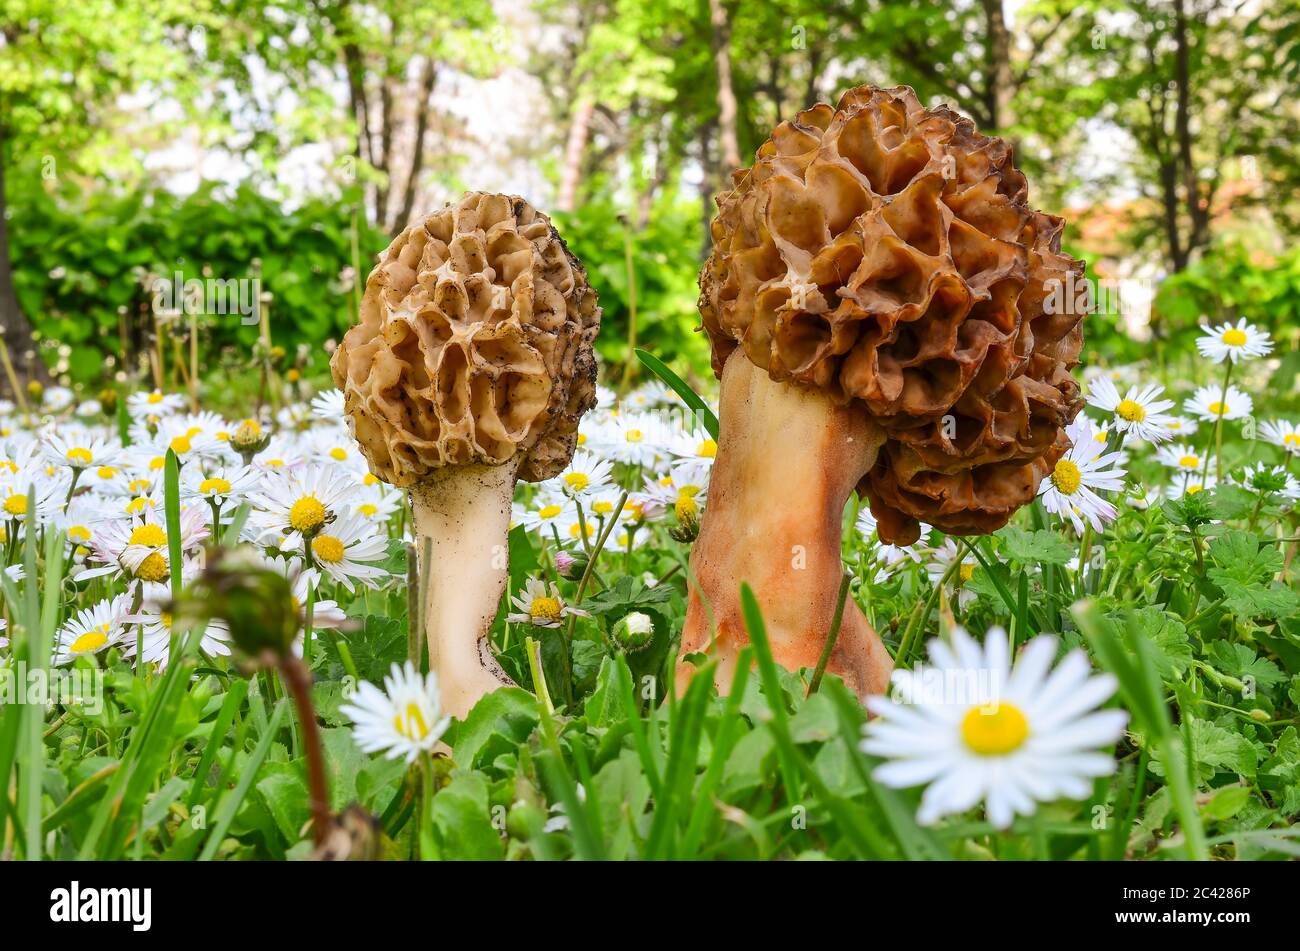 Two Morchella esculenta or Common morel mushrooms in fresh spring vegetation, among green grass and daisy flowers in sunset light Stock Photo